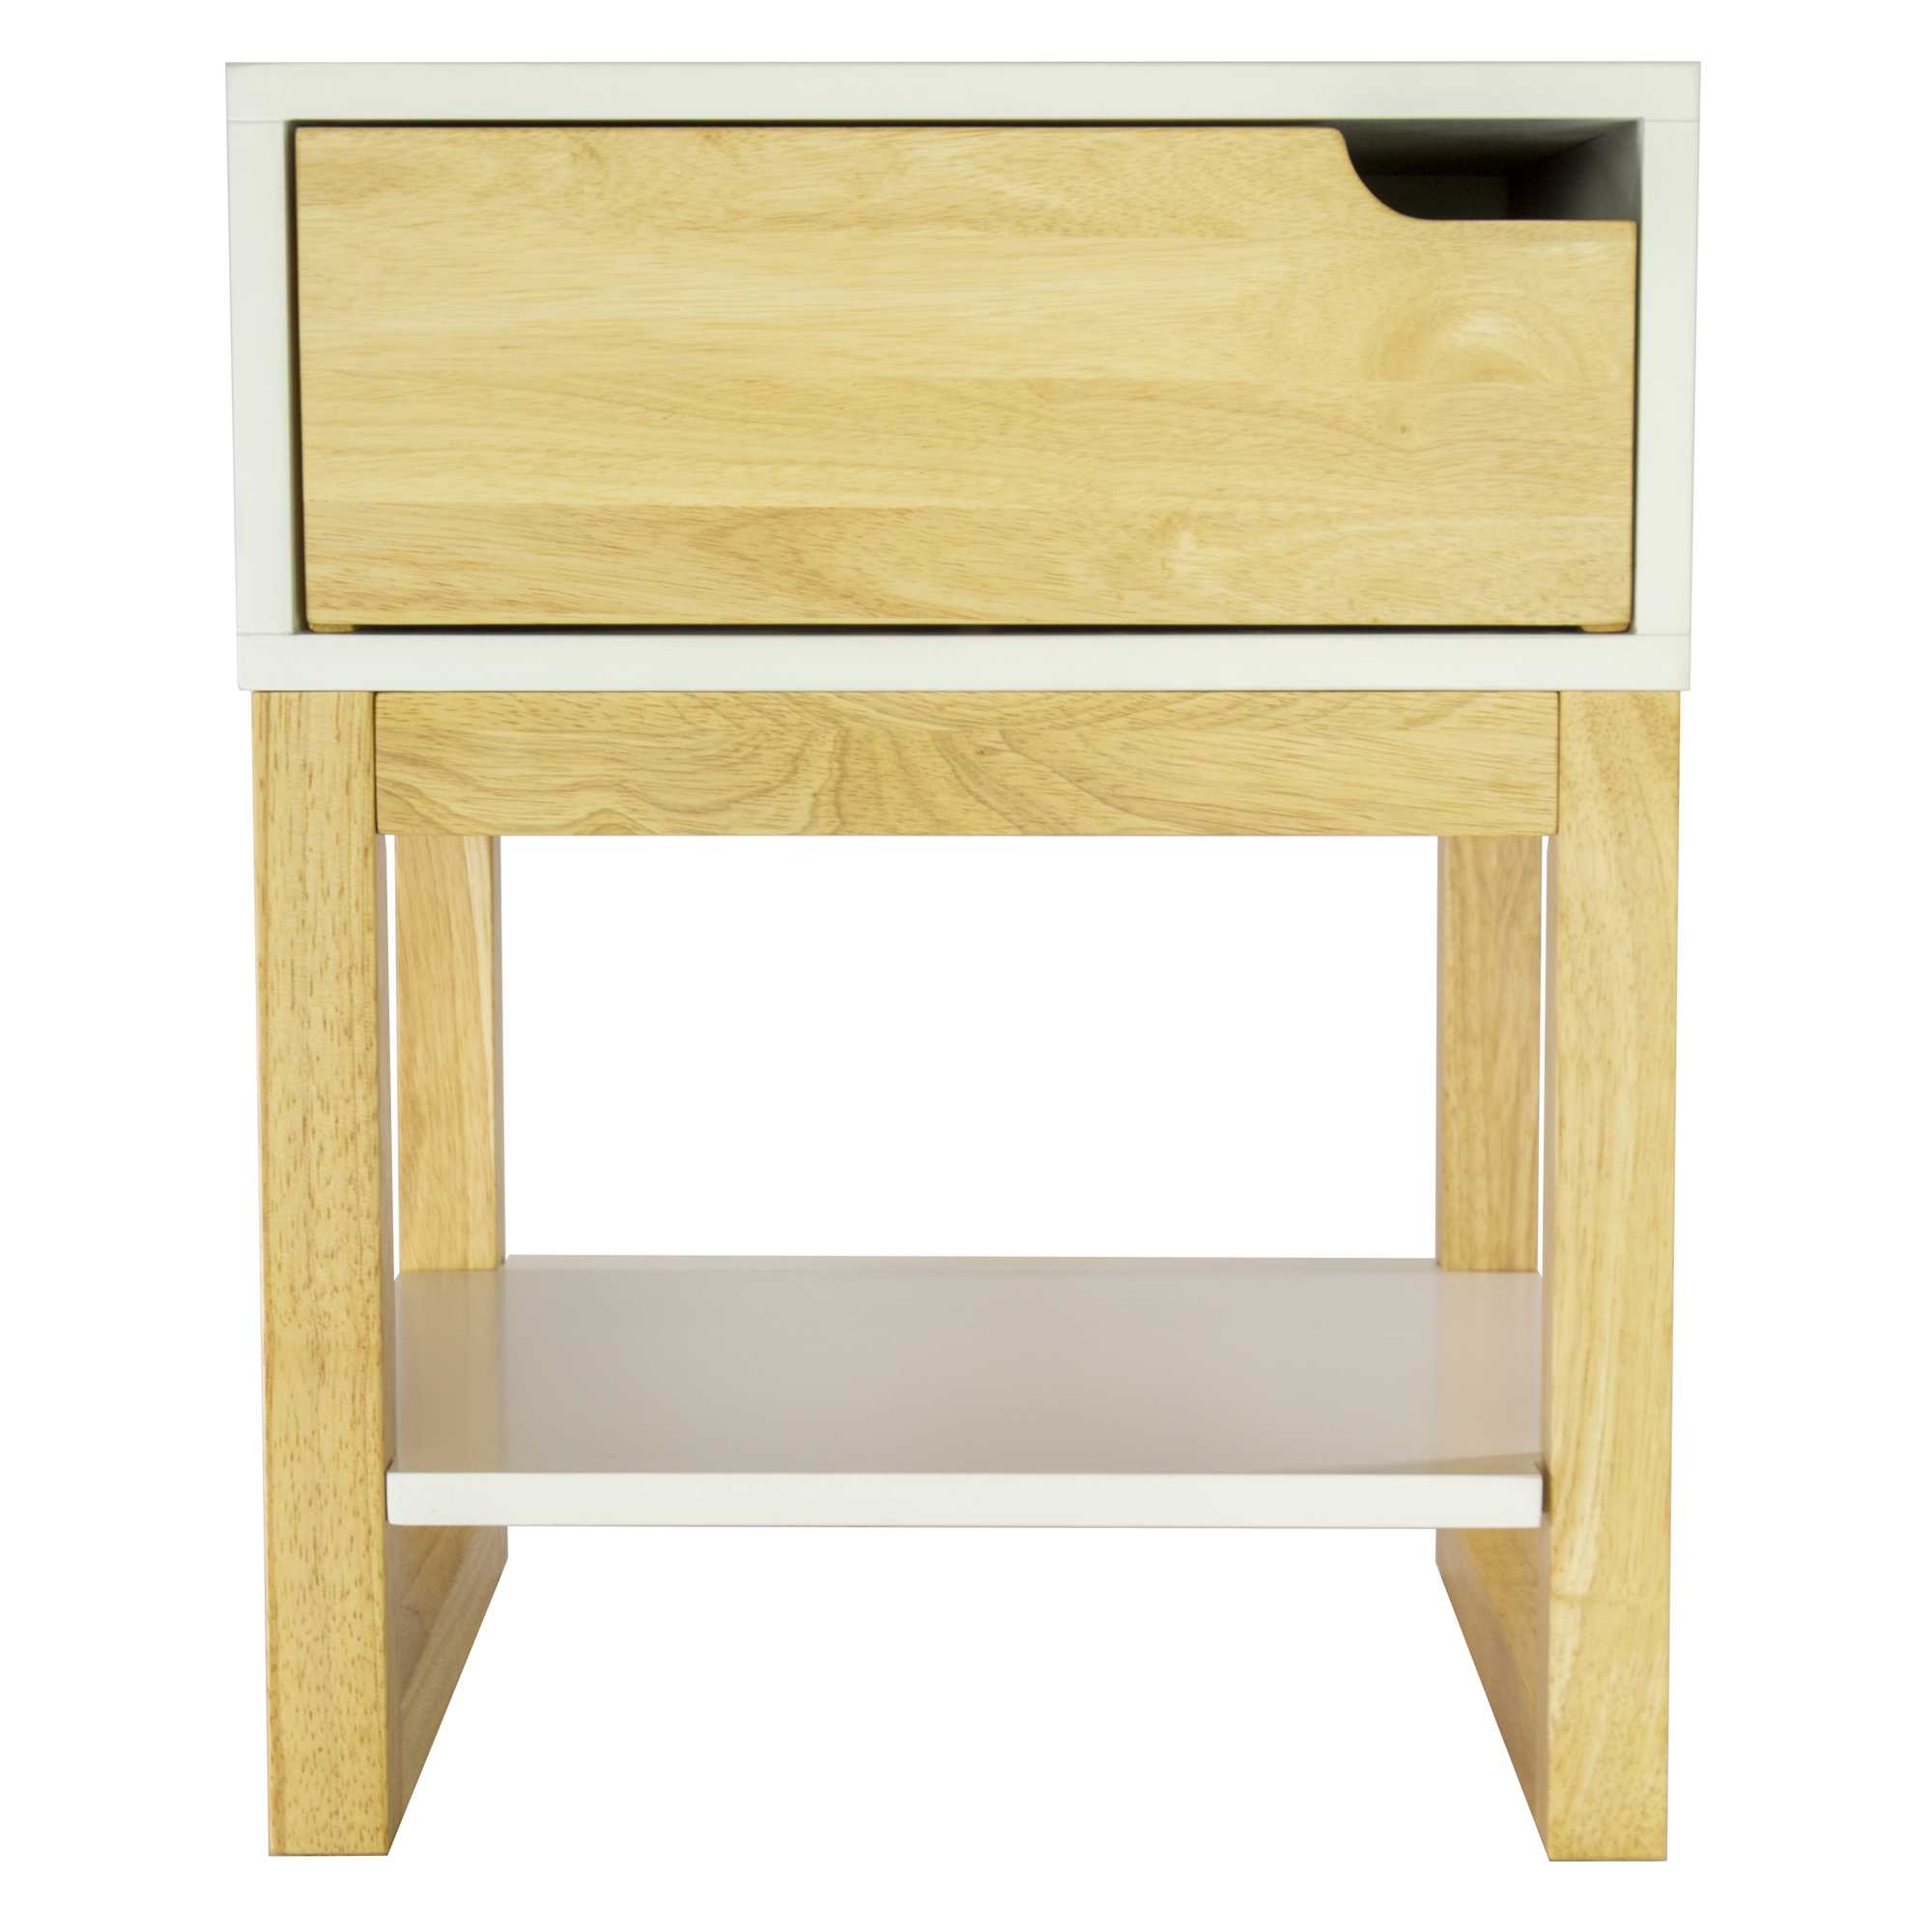 16" X 16" X 20" White & Natural Solid Wood One Drawer Side Table w/ Shelf